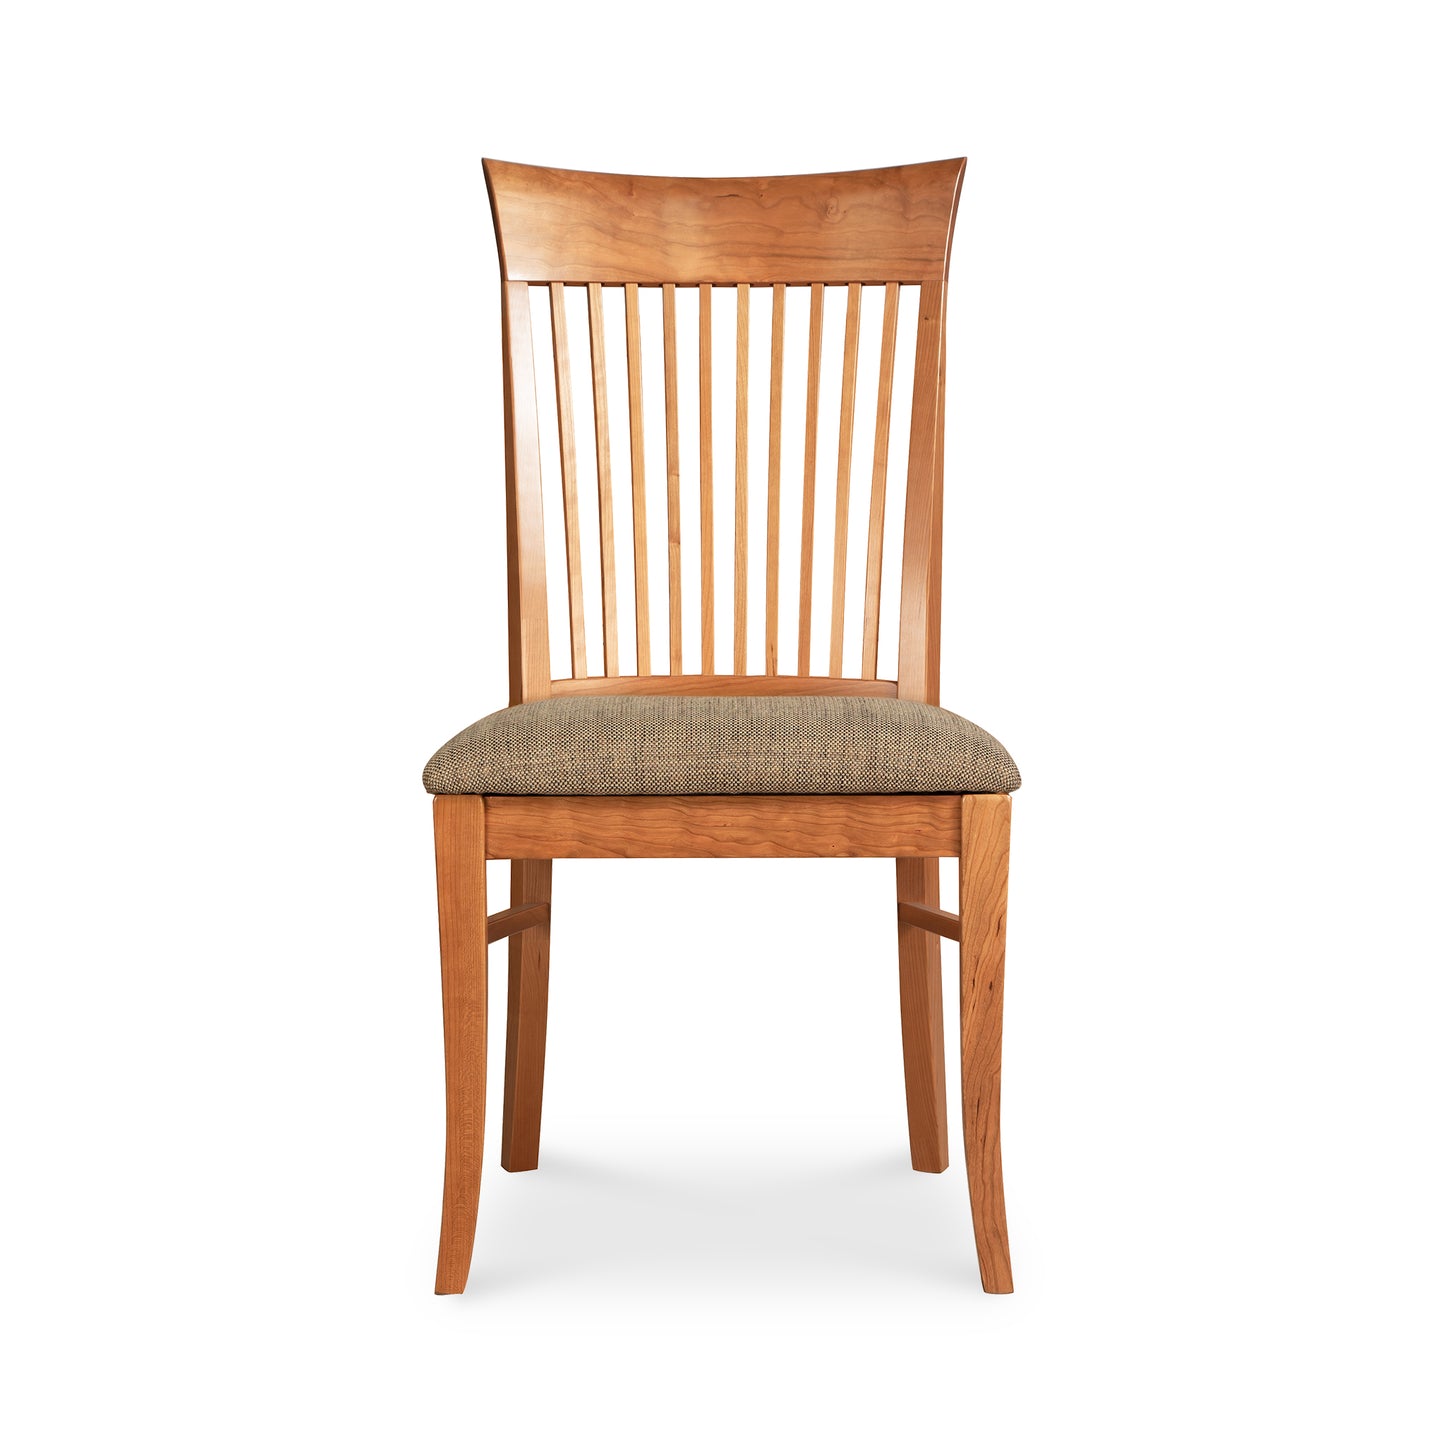 Contemporary Shaker Side Chair 6-Piece Set - Clearance from Vermont Woods Studios, with vertical slats and a cushioned seat on a white background, crafted from natural cherry.